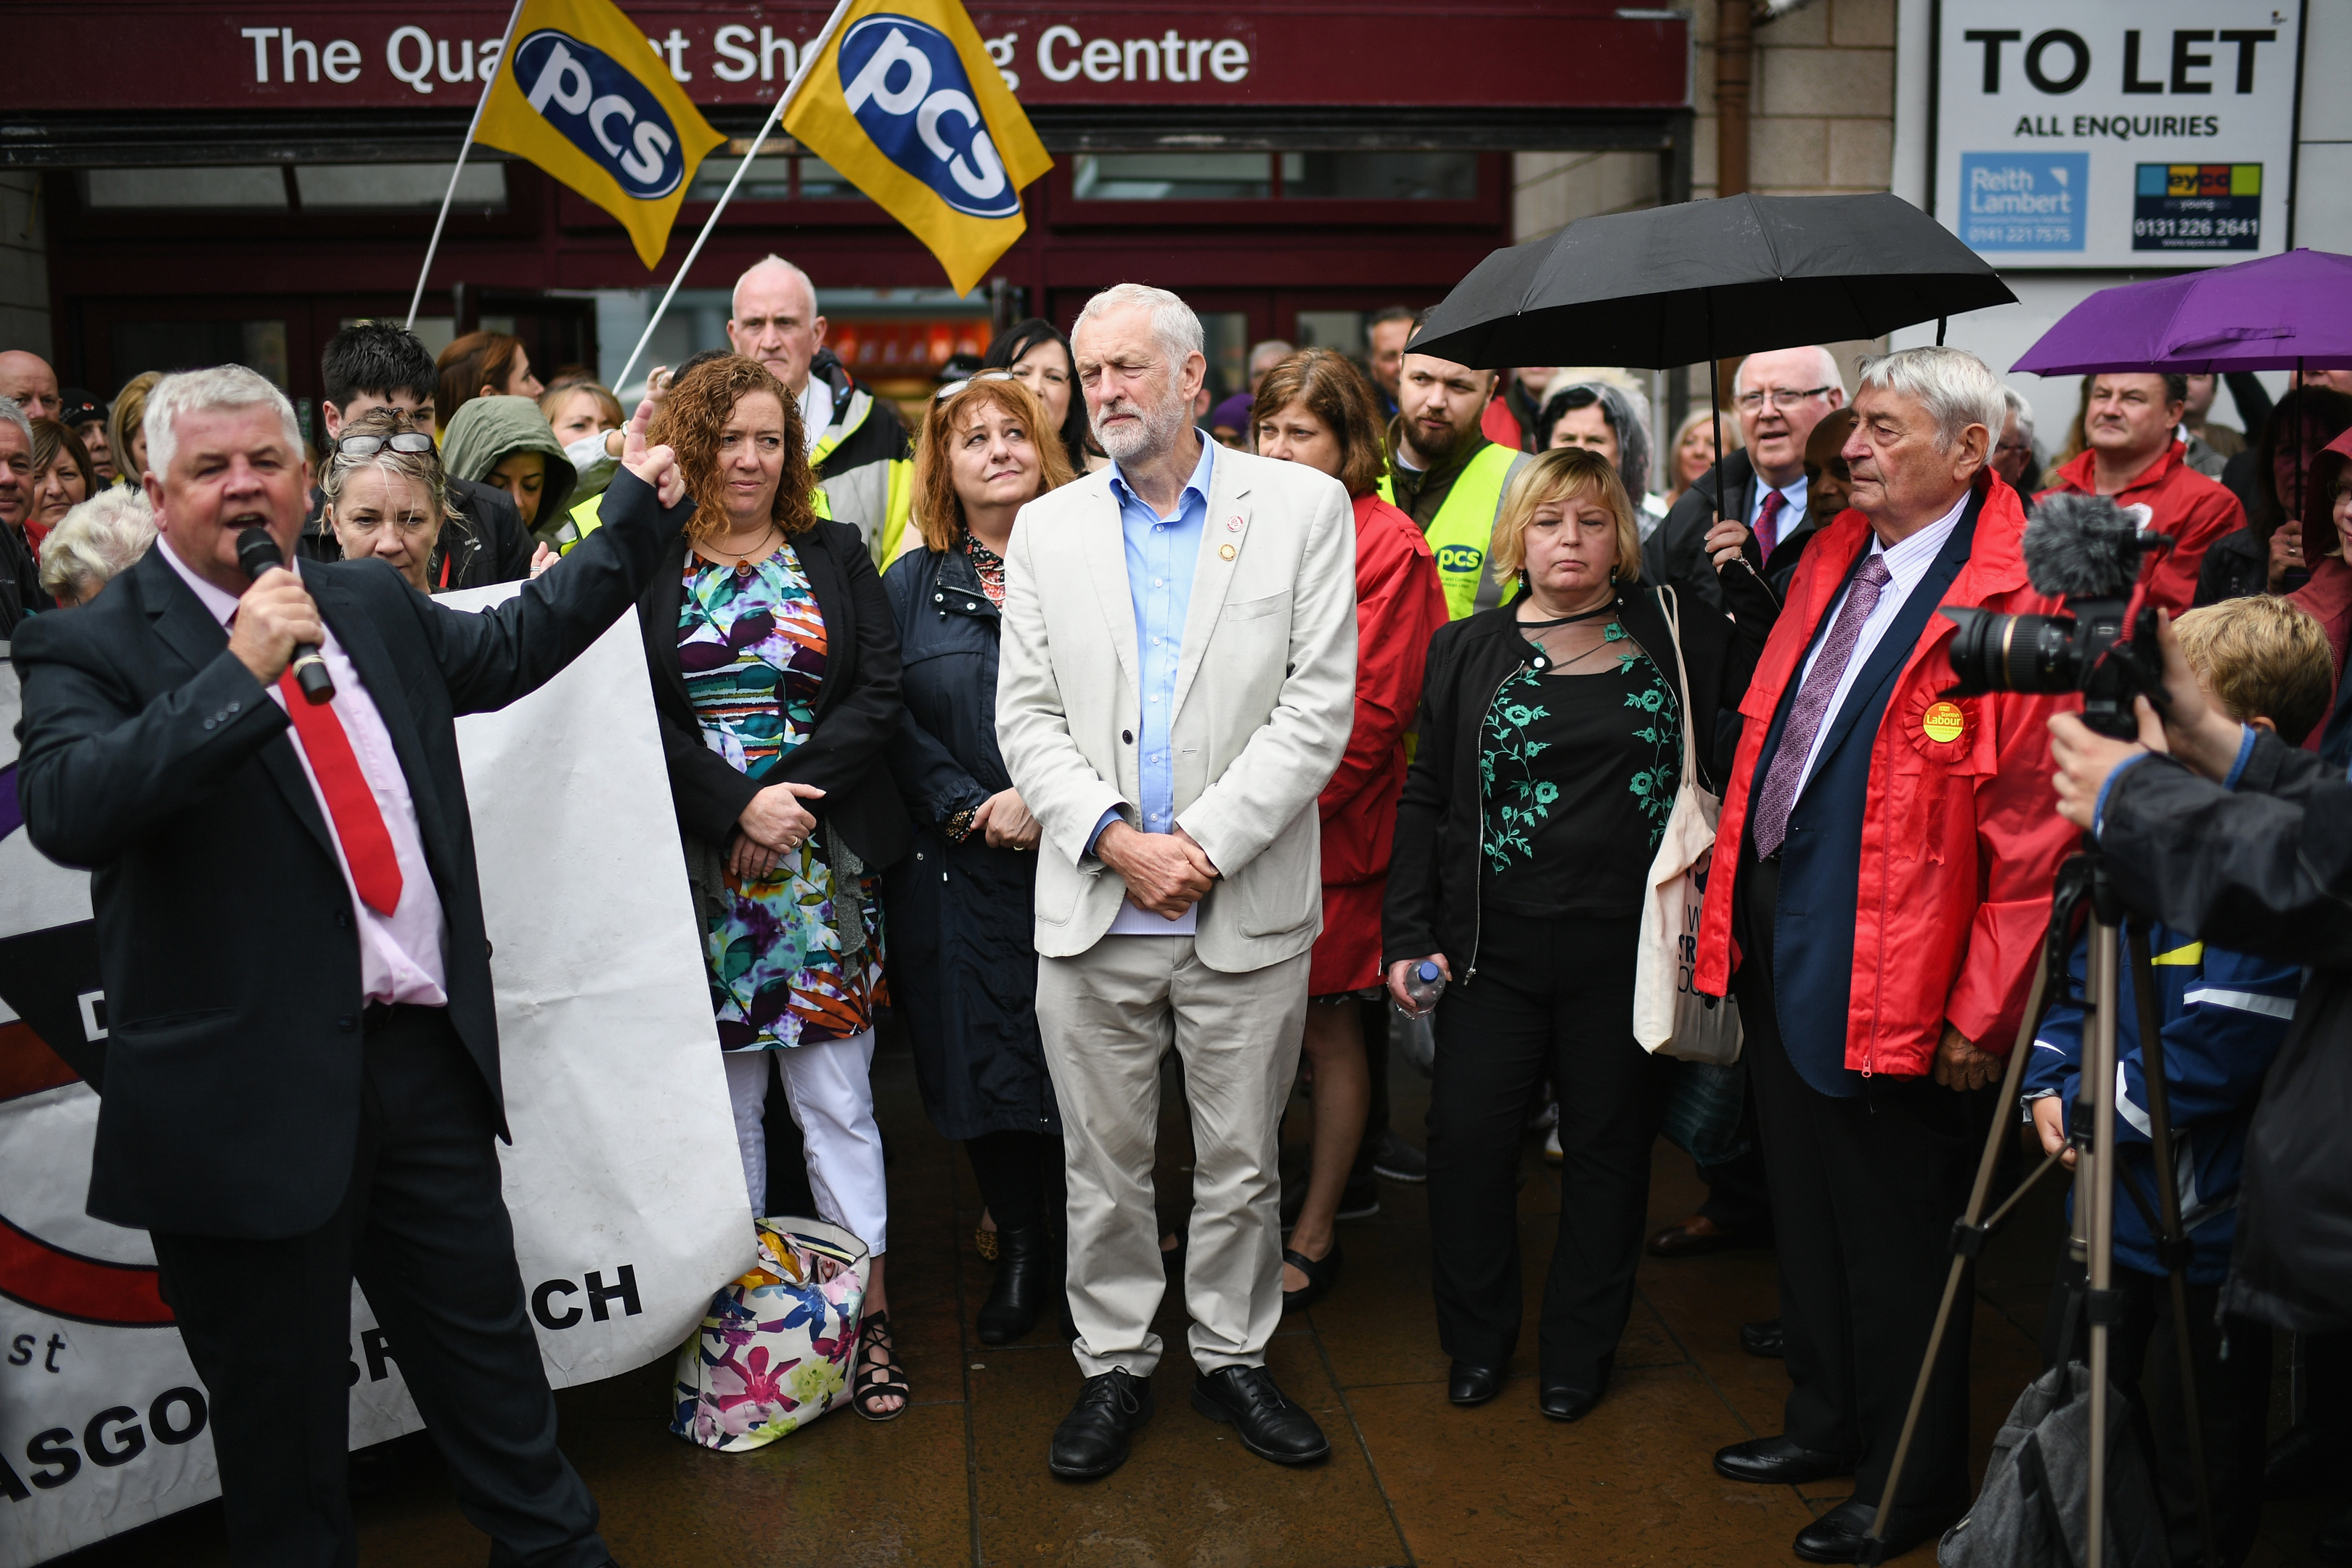 Labour leader Jeremy Corby addresses a public rally at the Quadrant shopping centre on August 25, 2017 in Coatbridge, Scotland (Jeff J Mitchell/Getty Images)